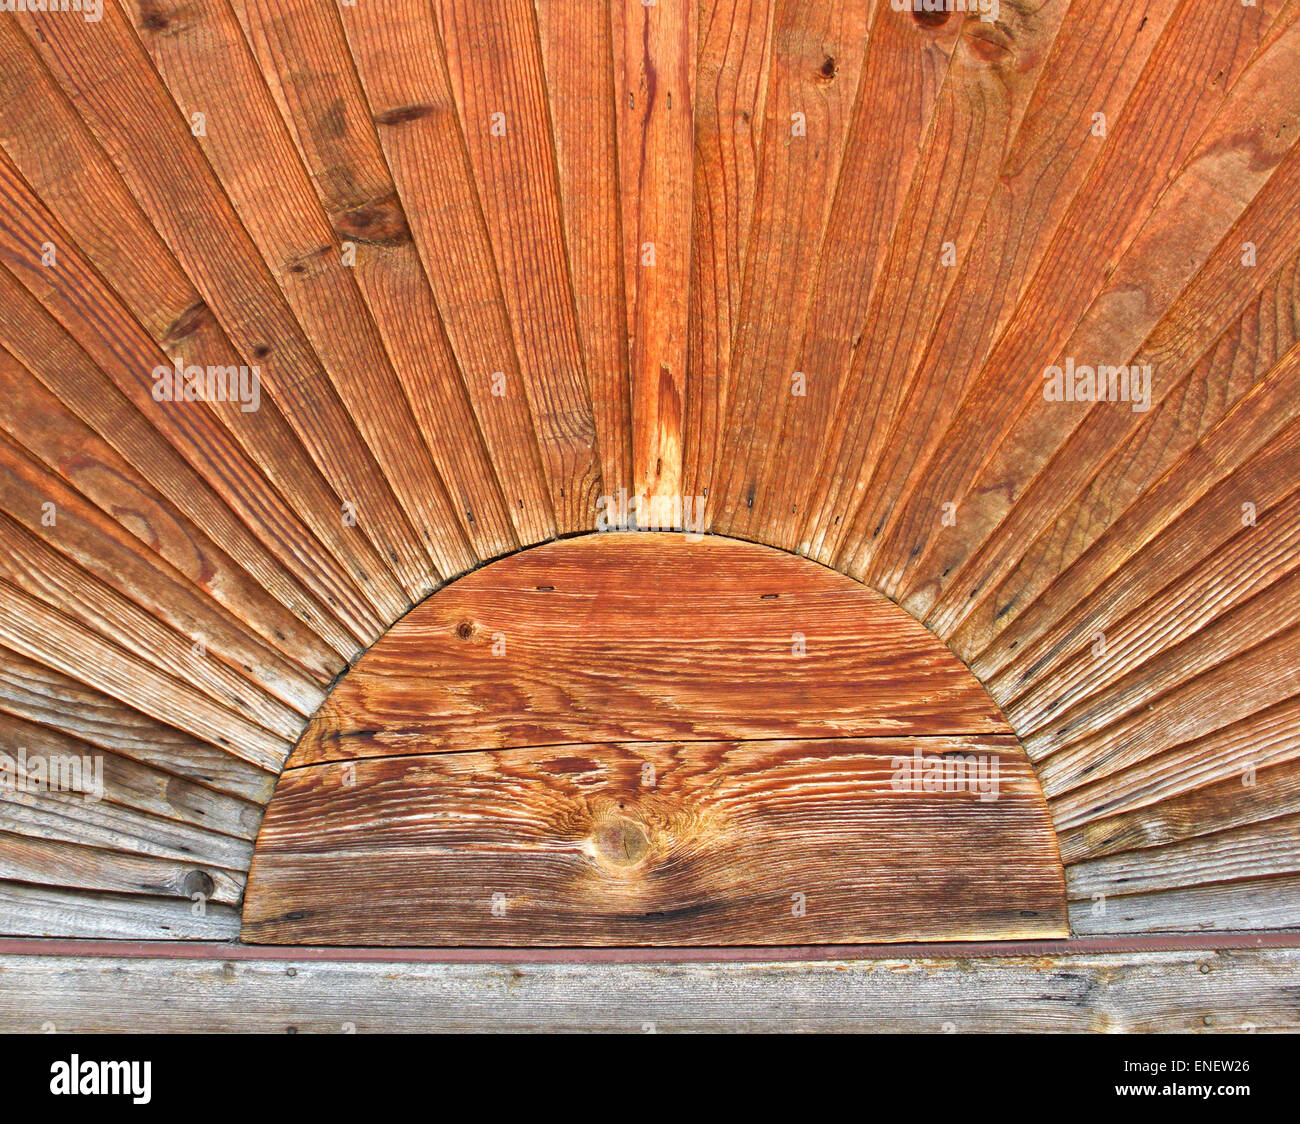 Close up of weathered wood craftsmanship design as a sun with sunbeams. Stock Photo